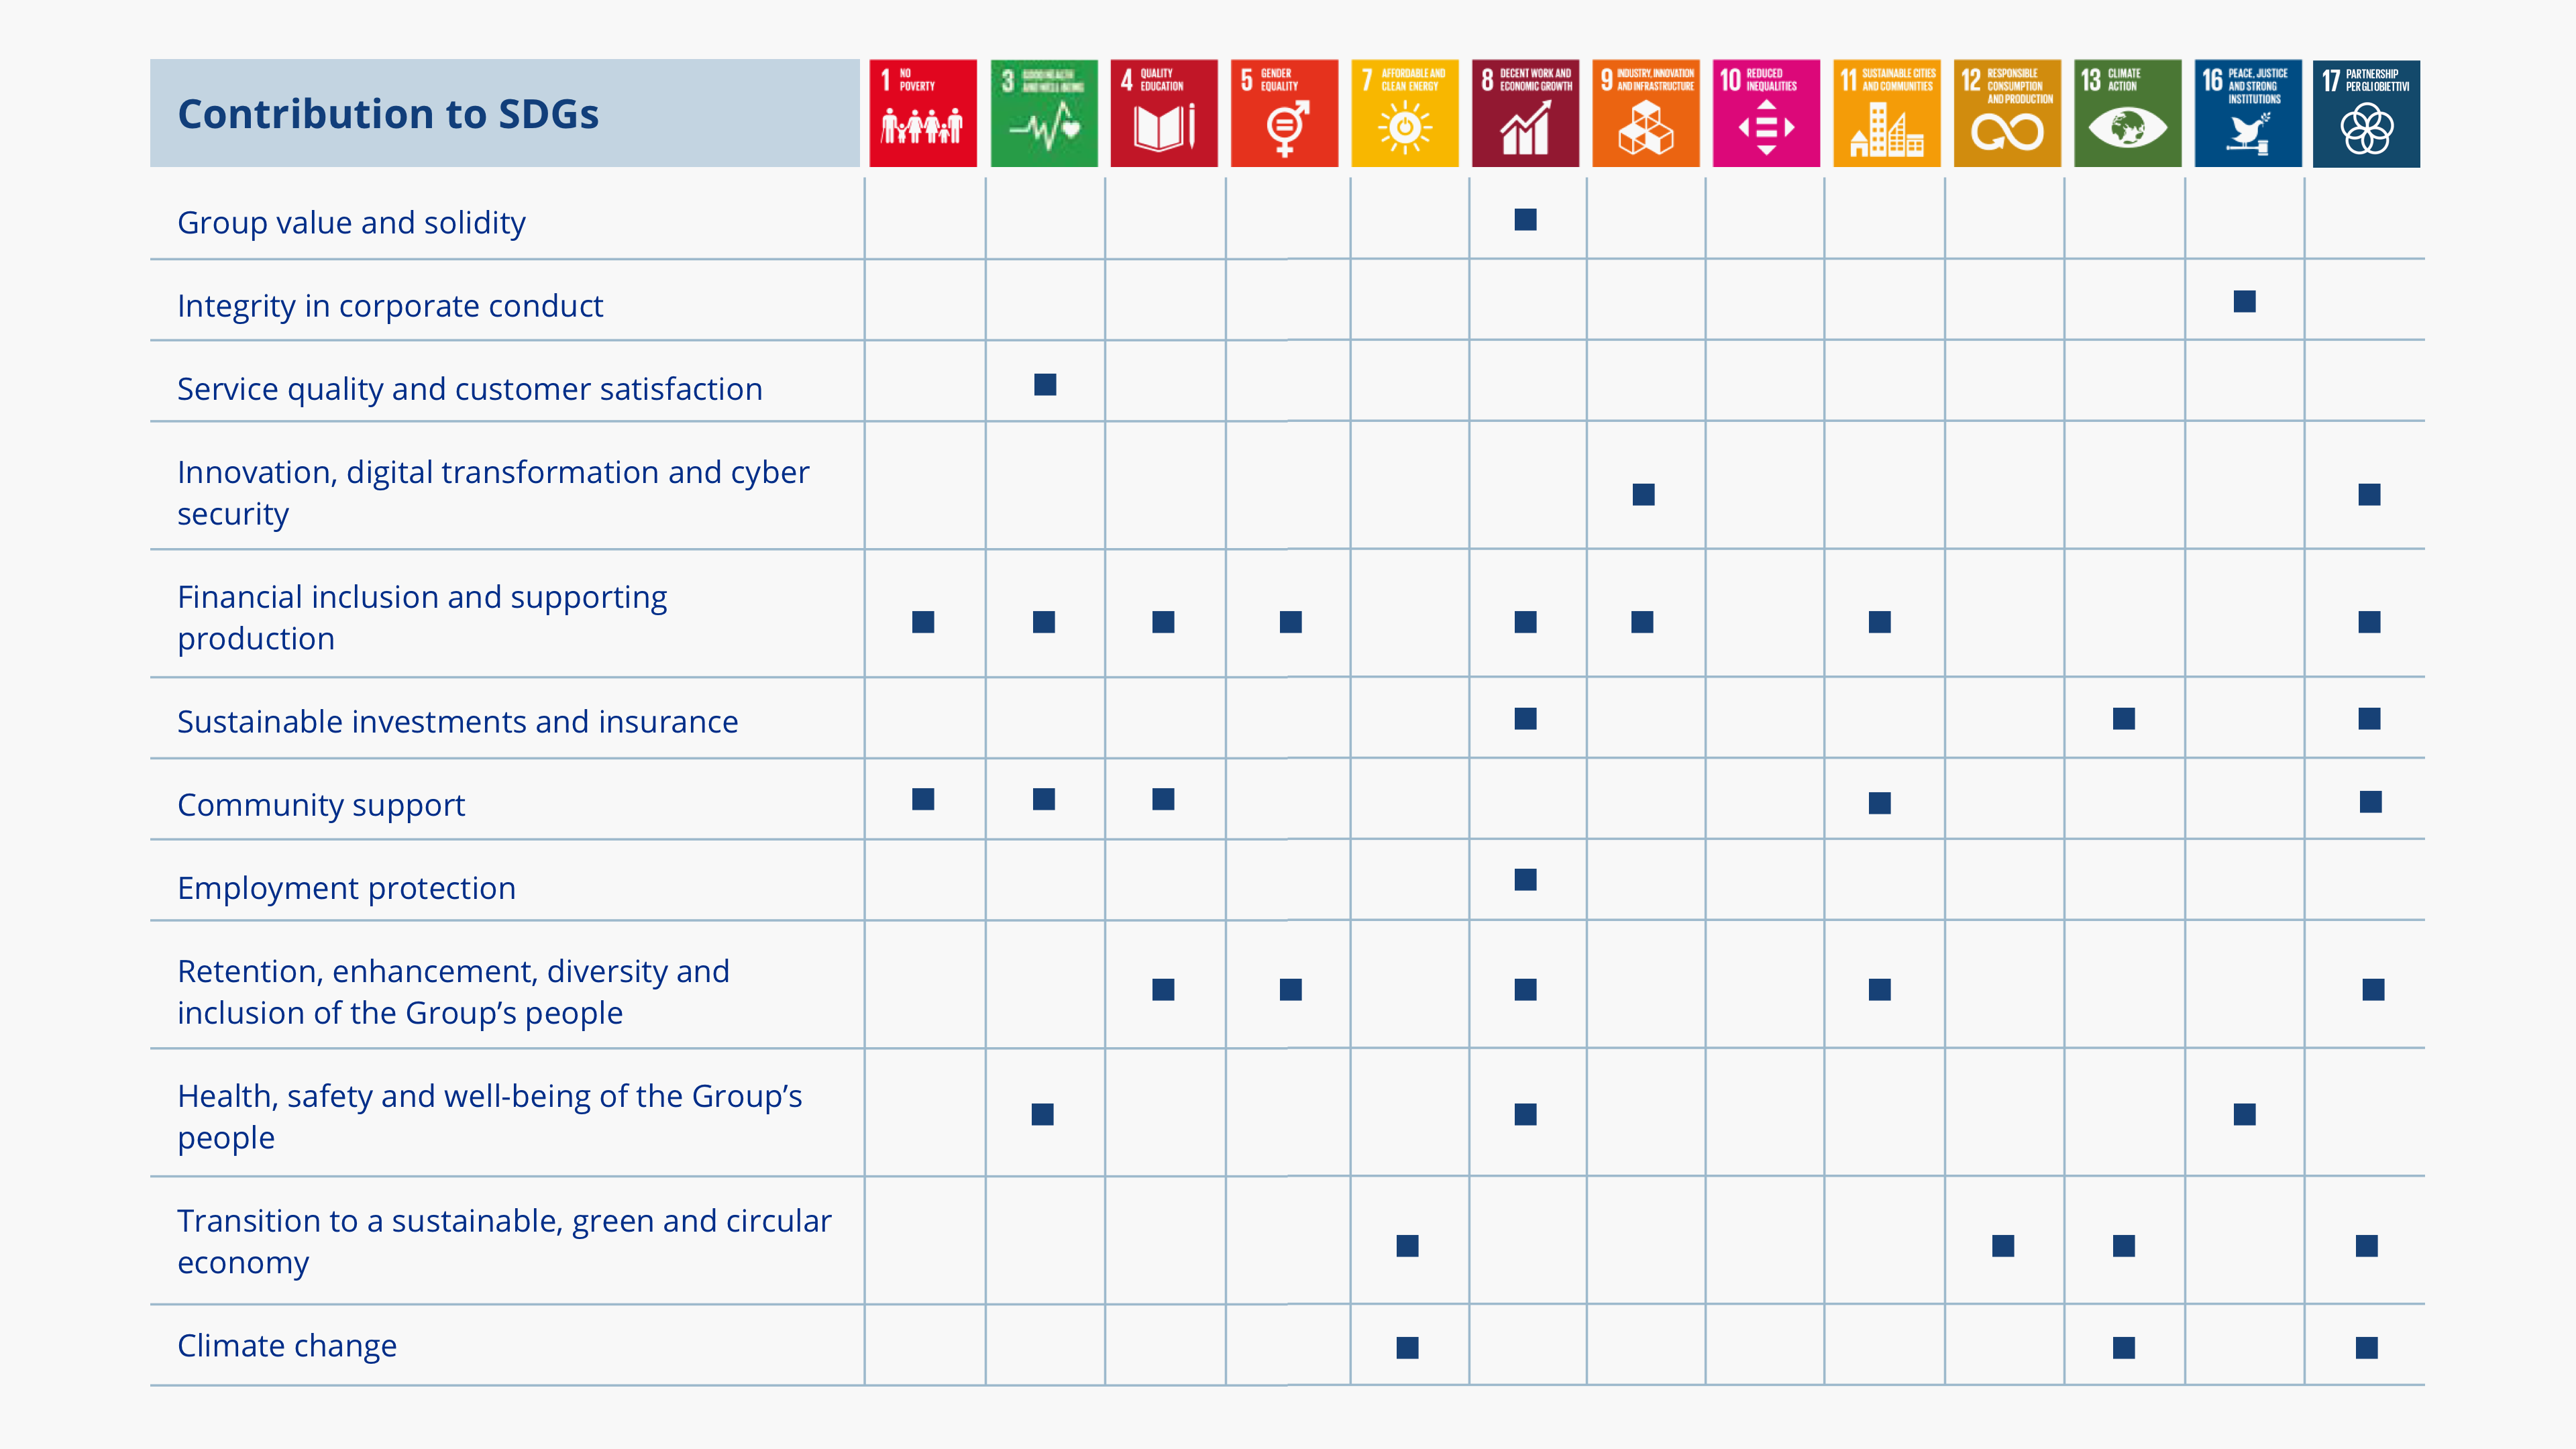 Image table with link between SDGs and material issues